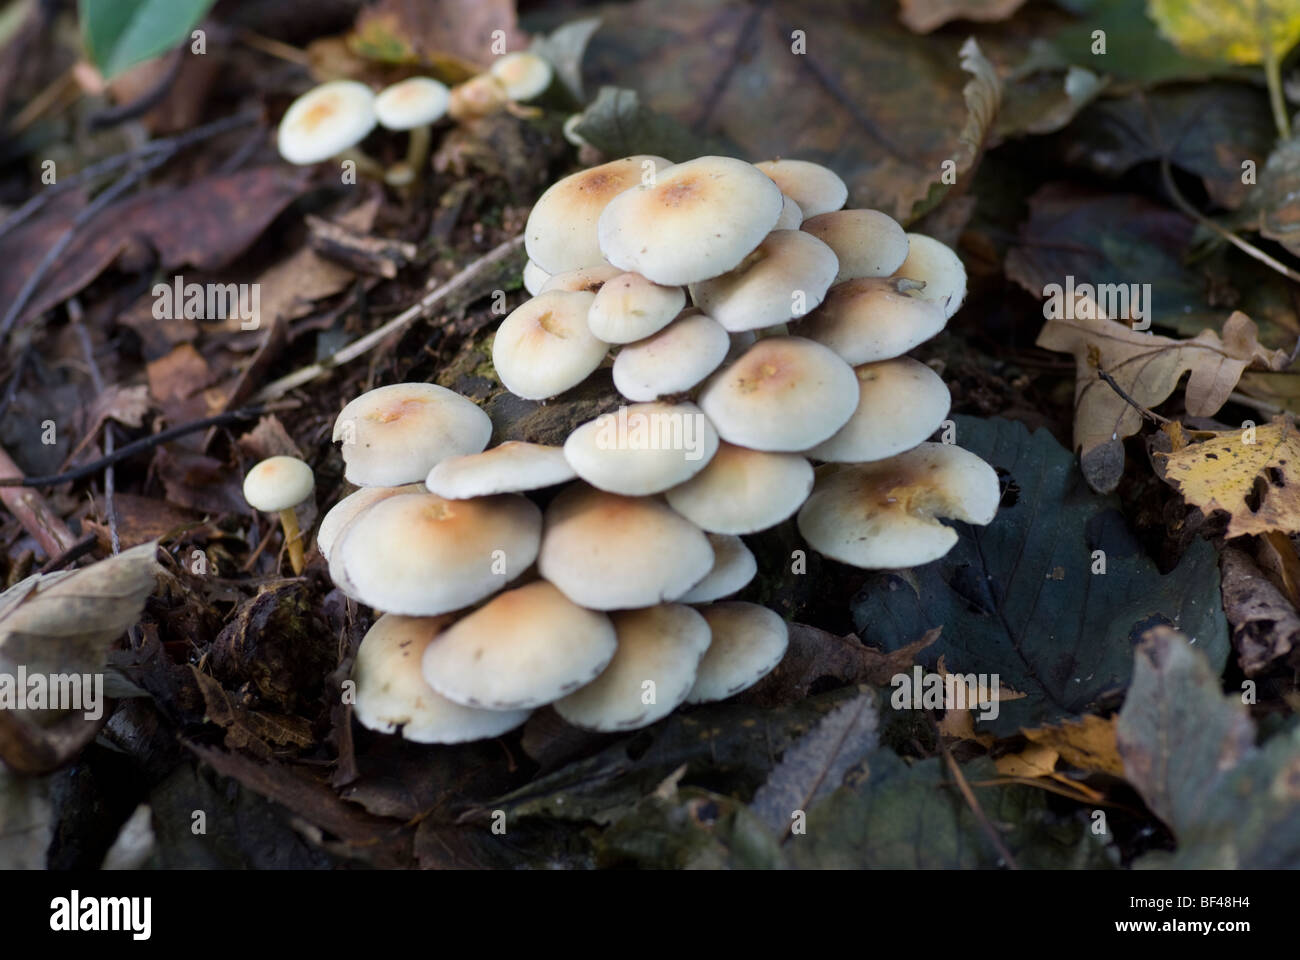 Clusters of young honey fungus caps (armillaria mellea) on an old decaying tree stump Stock Photo